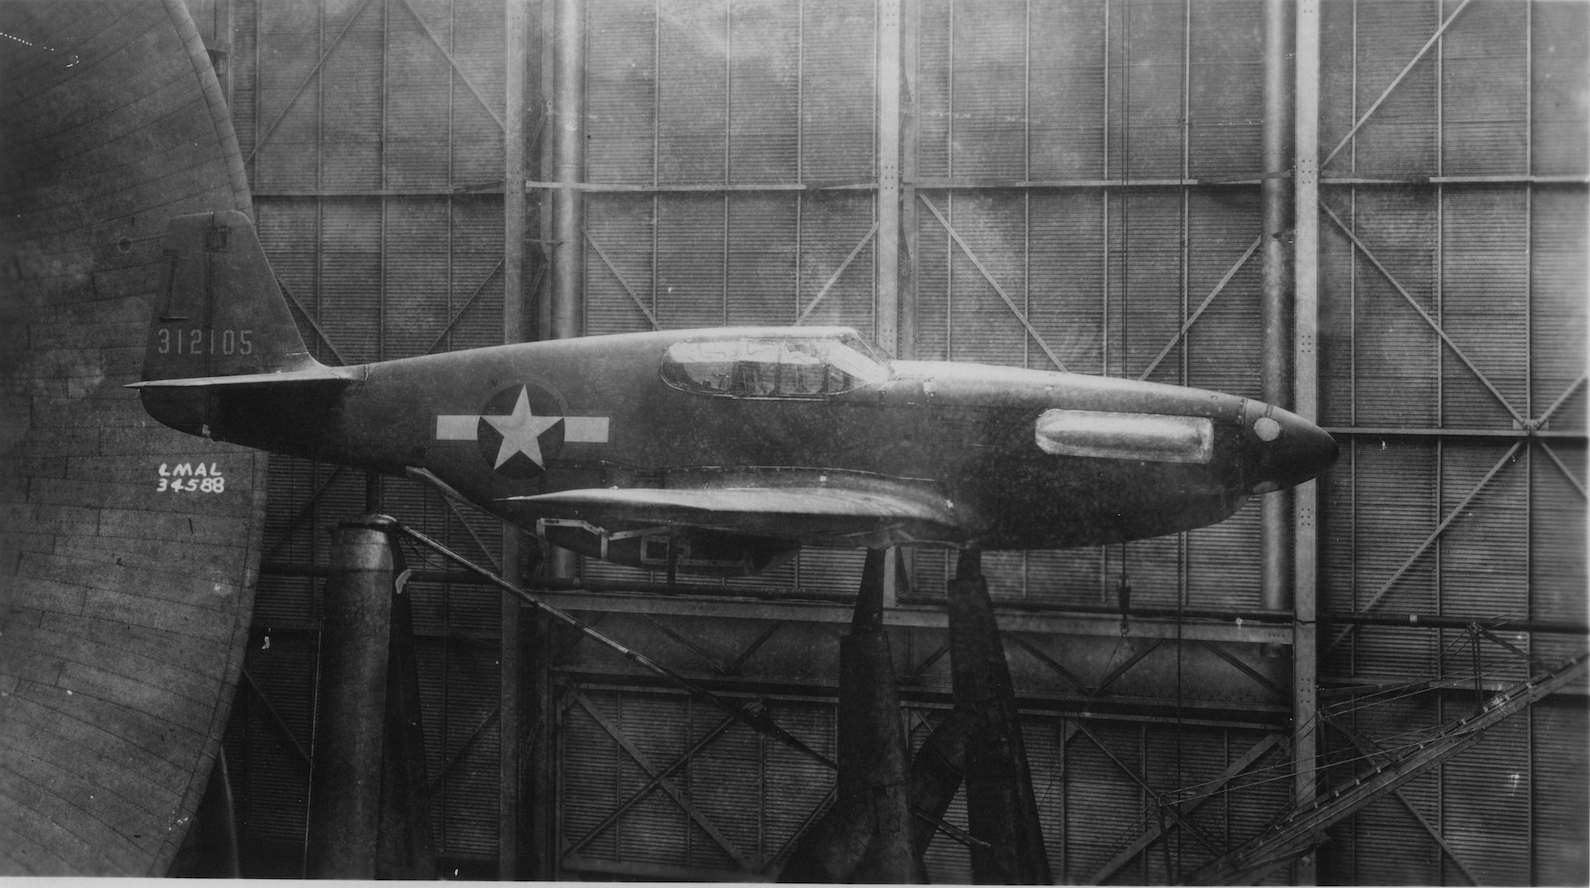 1945 WWII P-51 Mustang Full Scale Tunnel-Langley Aeronautical Lab Aviation Photo 